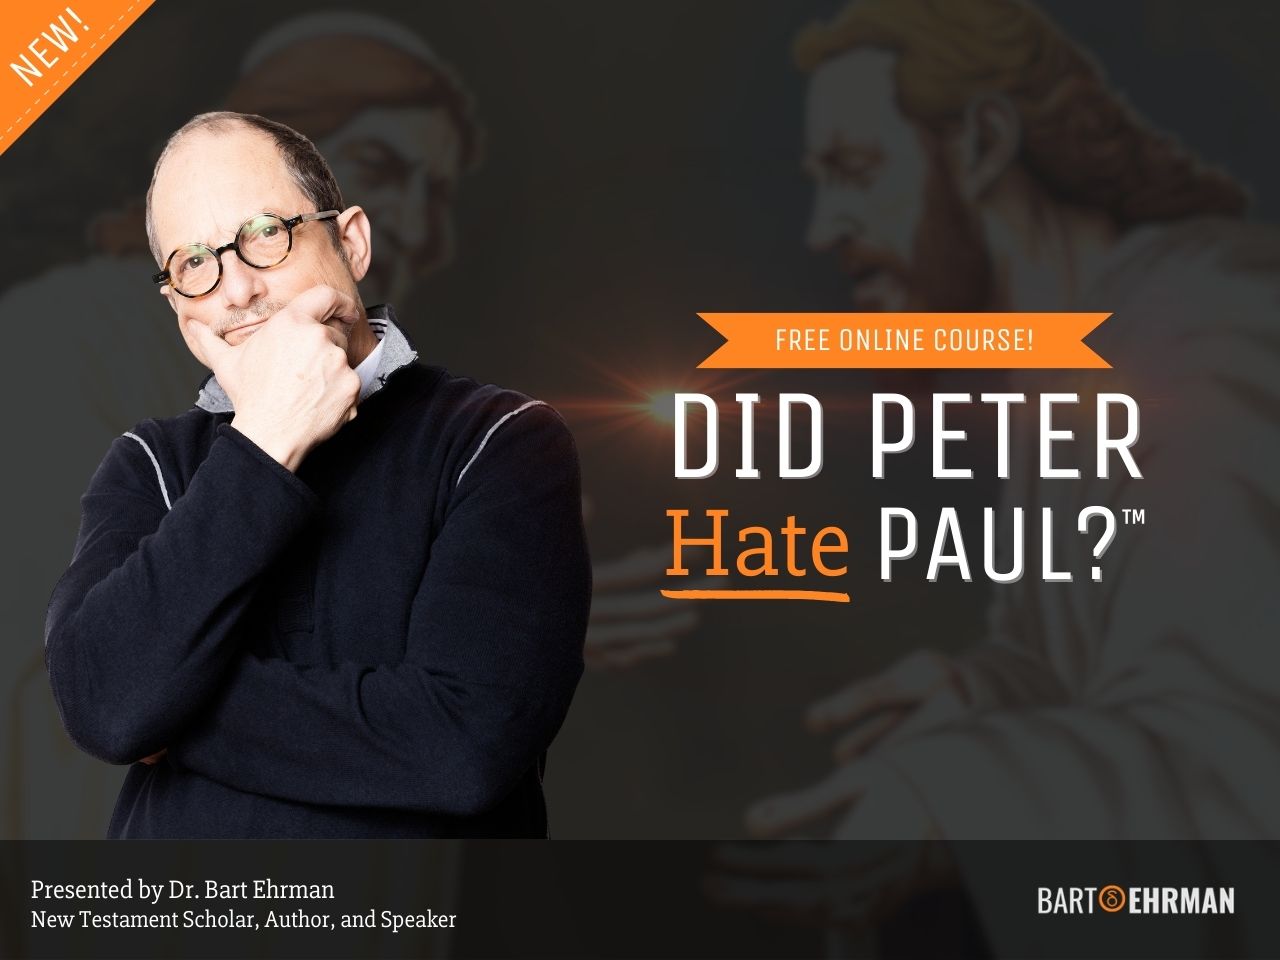 Did Peter Hate Paul - A New Course by Dr Bart Ehrman